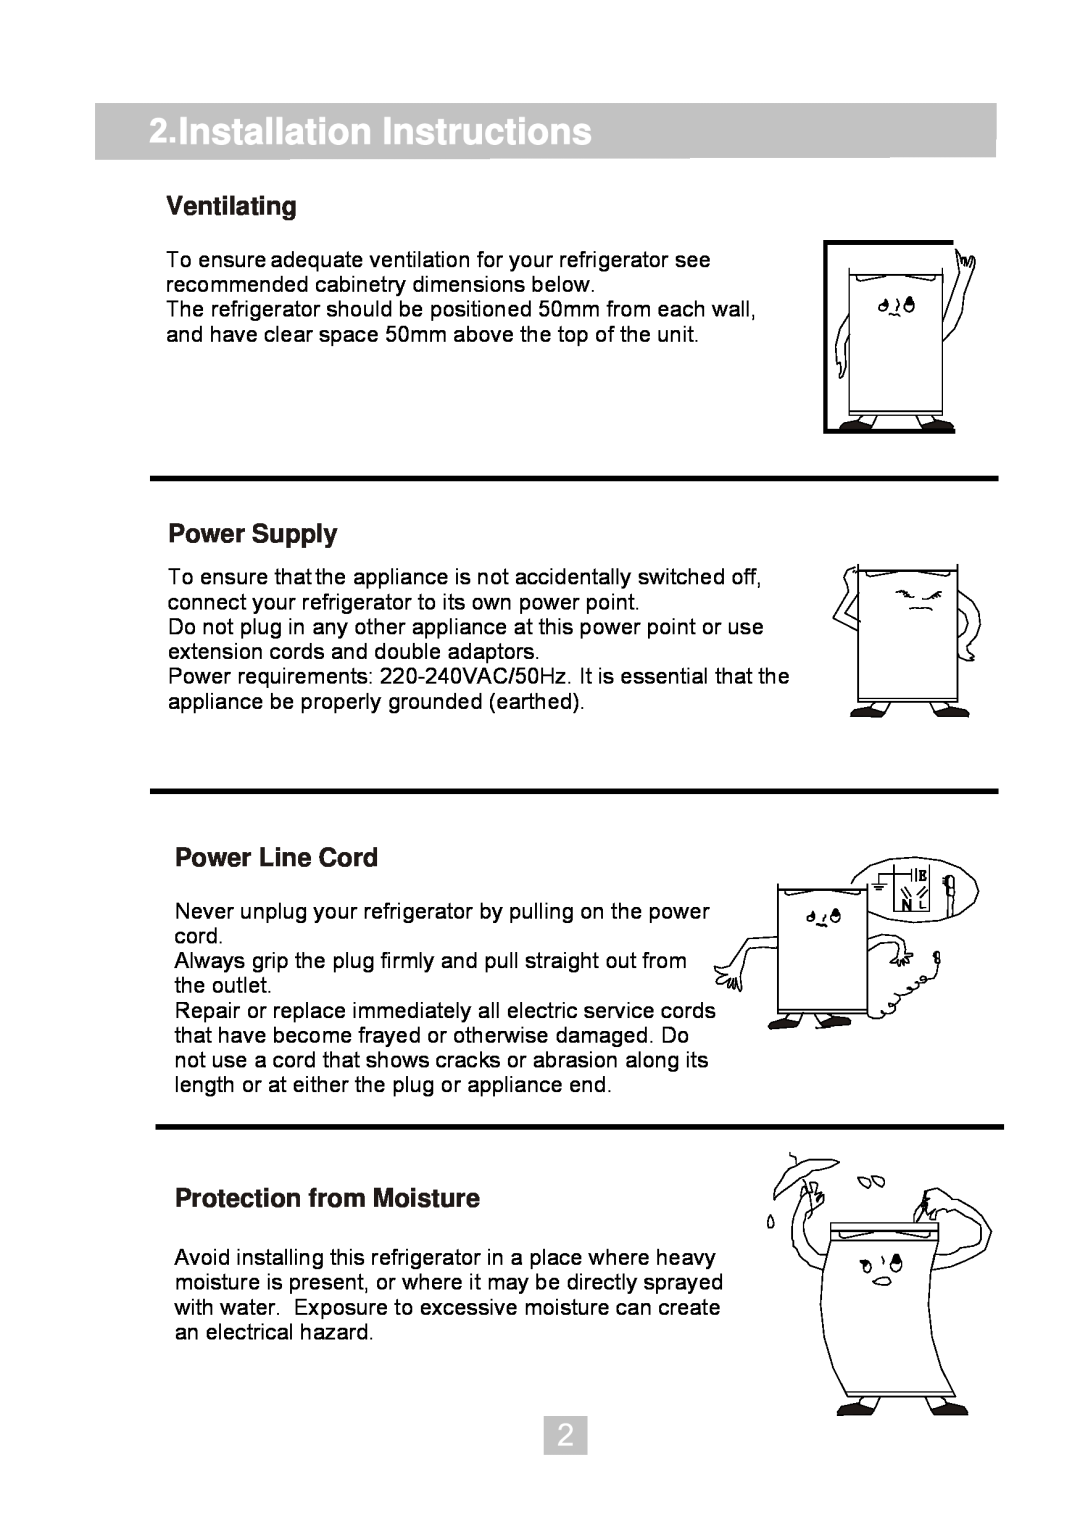 Haier HRZ-40 manual Installation Instructions, Ventilating, Power Supply, Power Line Cord, Protection from Moisture 